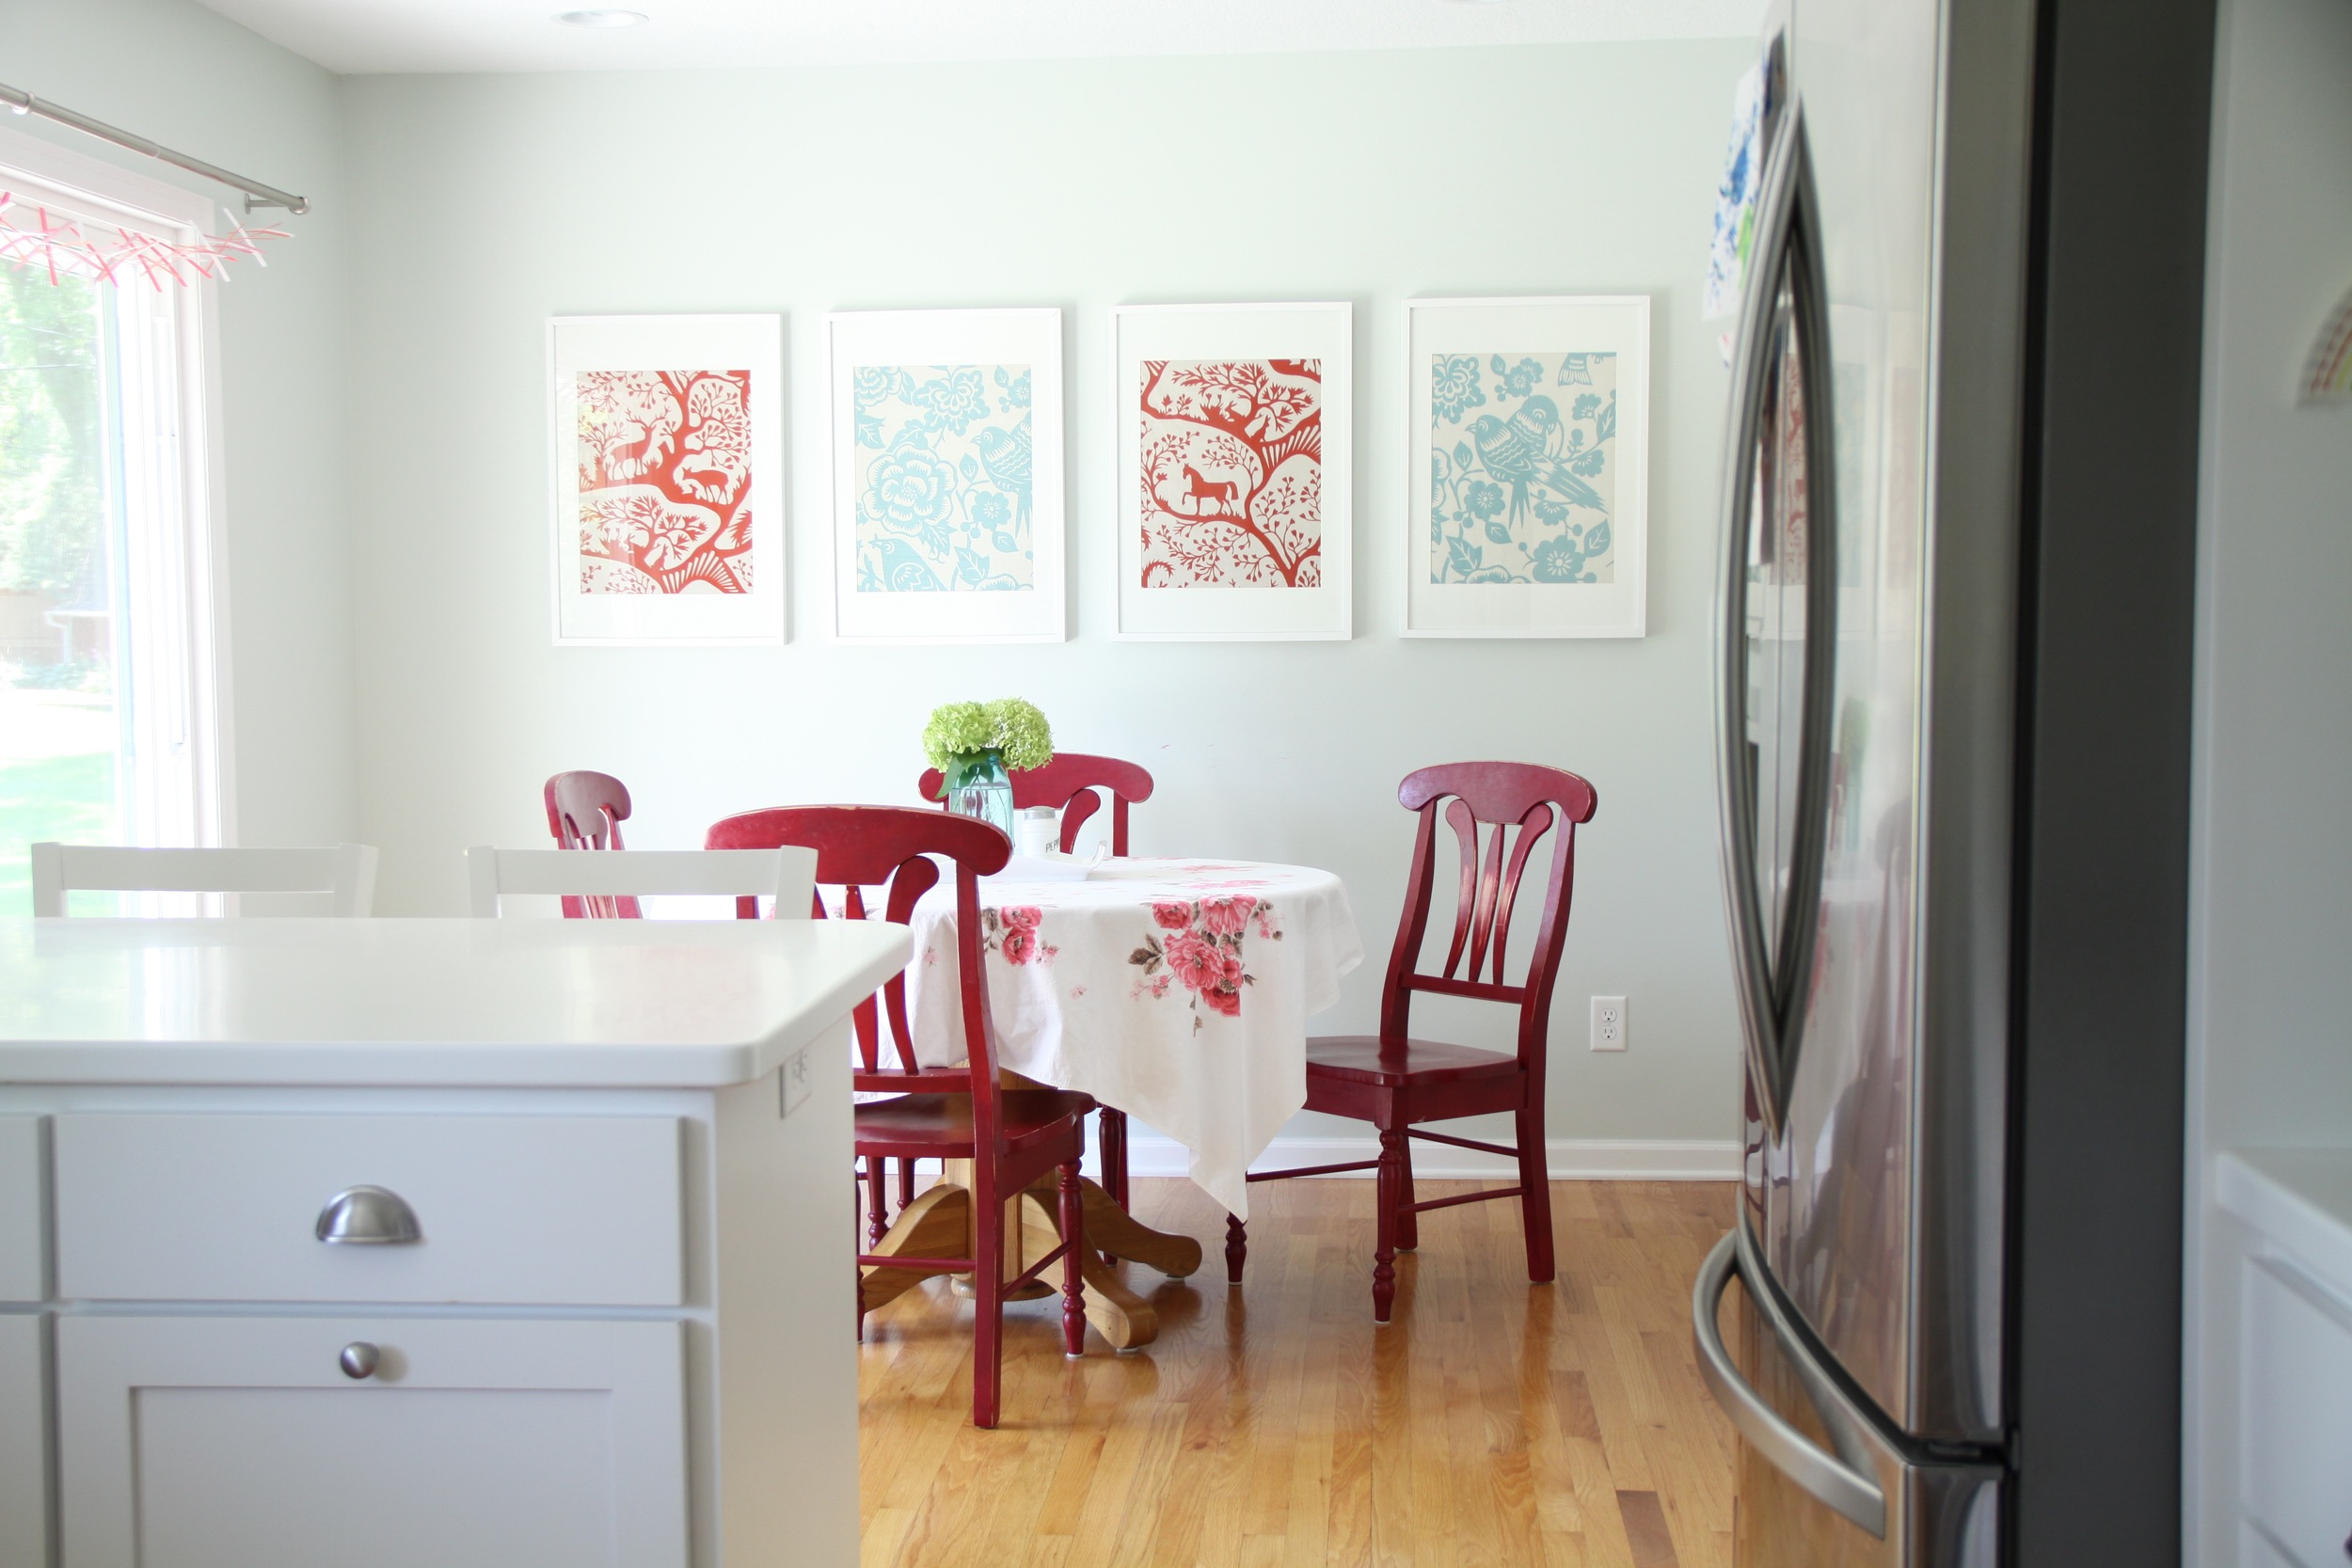 Dining Area with Framed Fabric Art